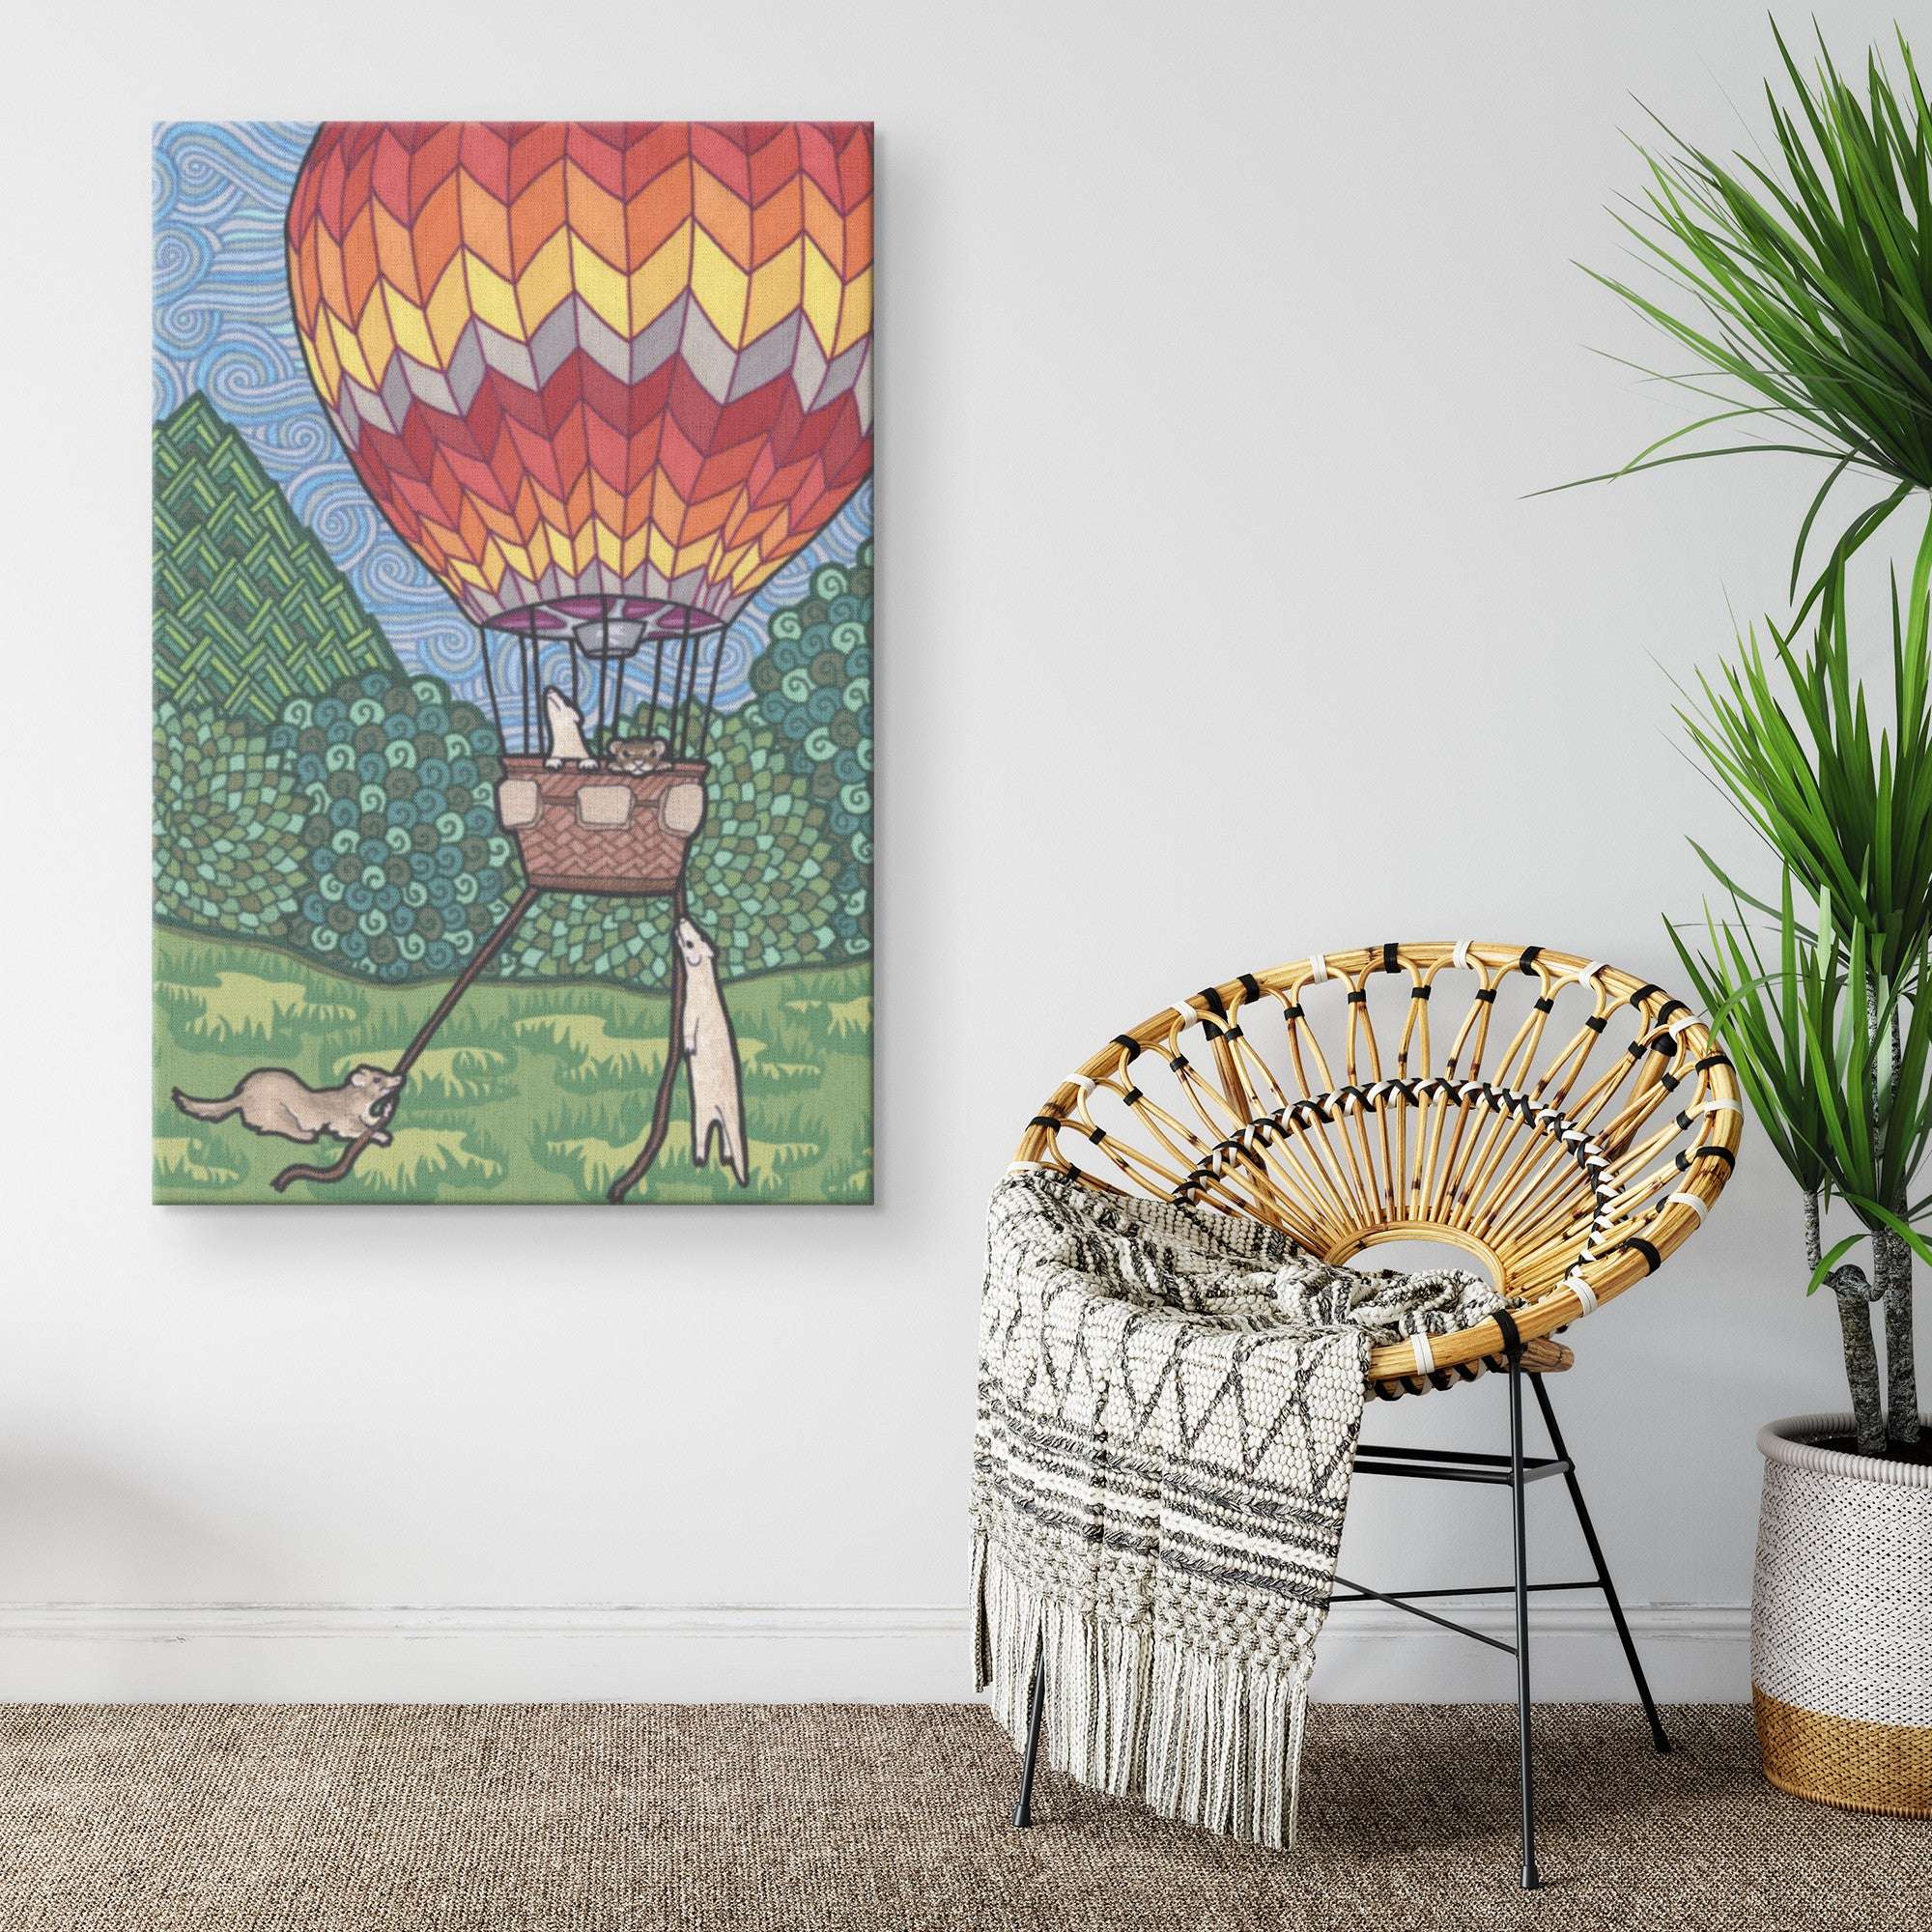 A canvas art print of a painting with ferrets in a hot air balloon, decor for children's bedroom or nursery.